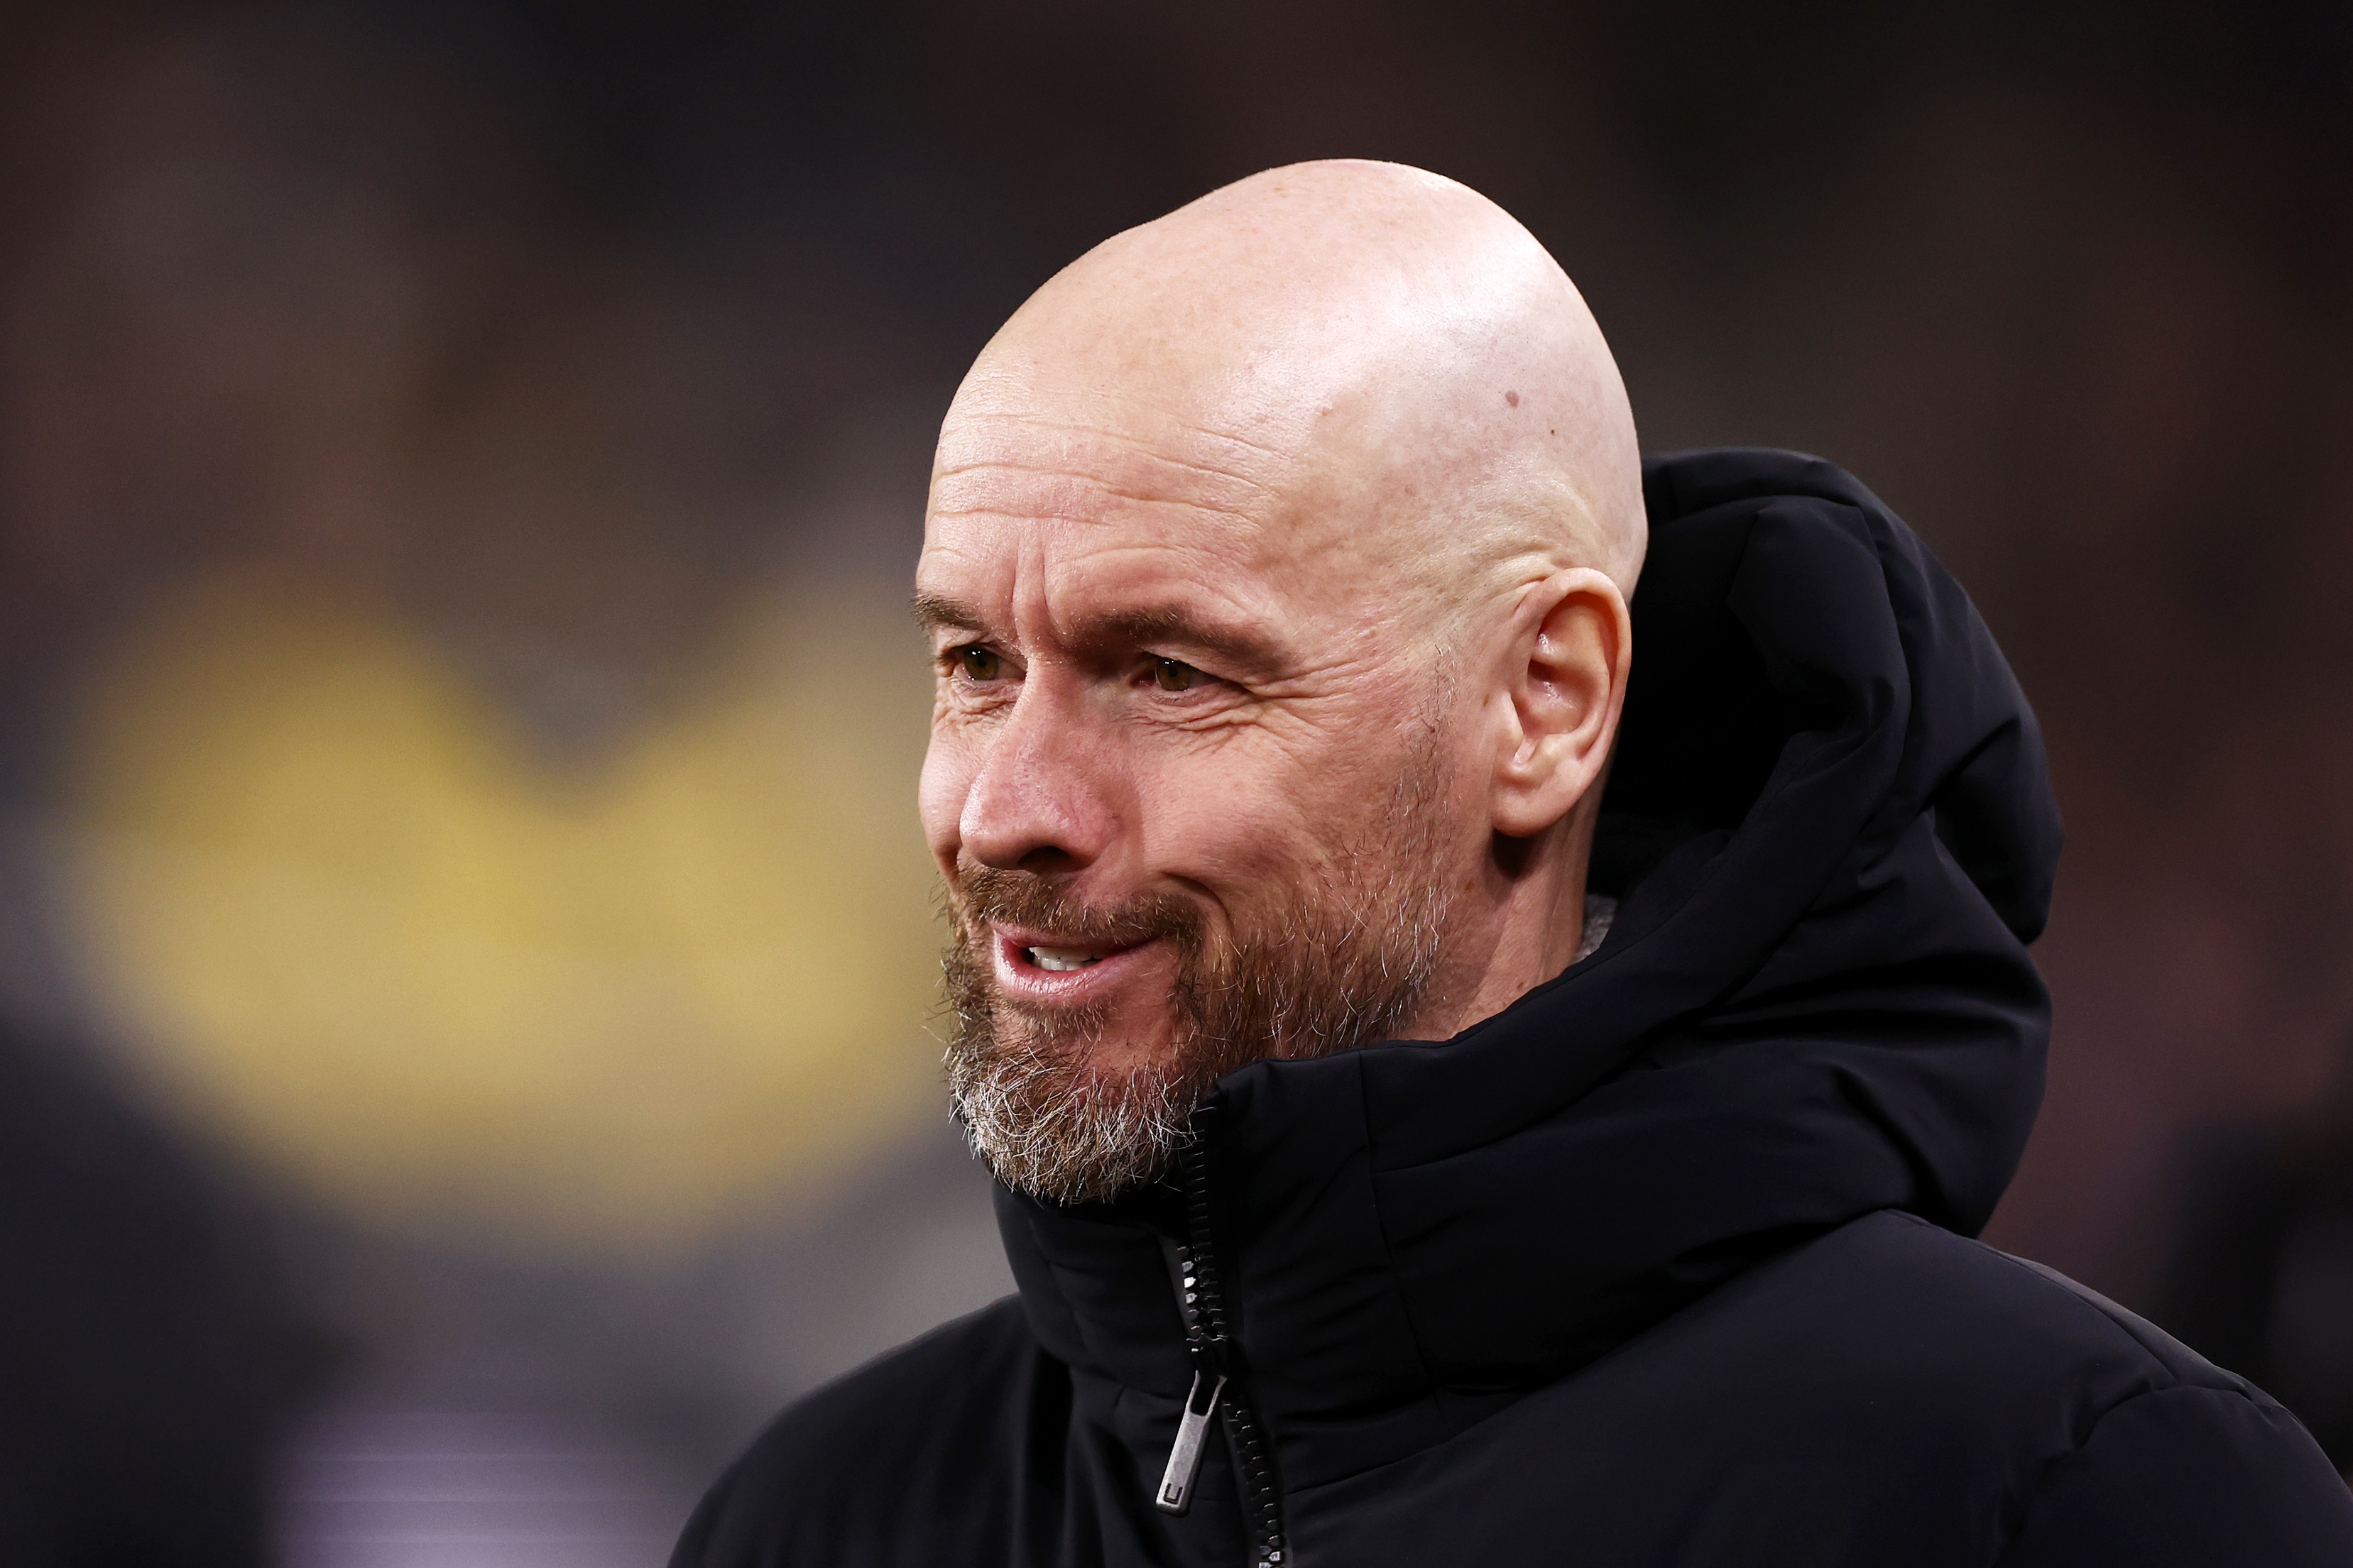 Scott McTominay “delighted” for under-fire Man United manager Erik ten Hag after FA Cup win